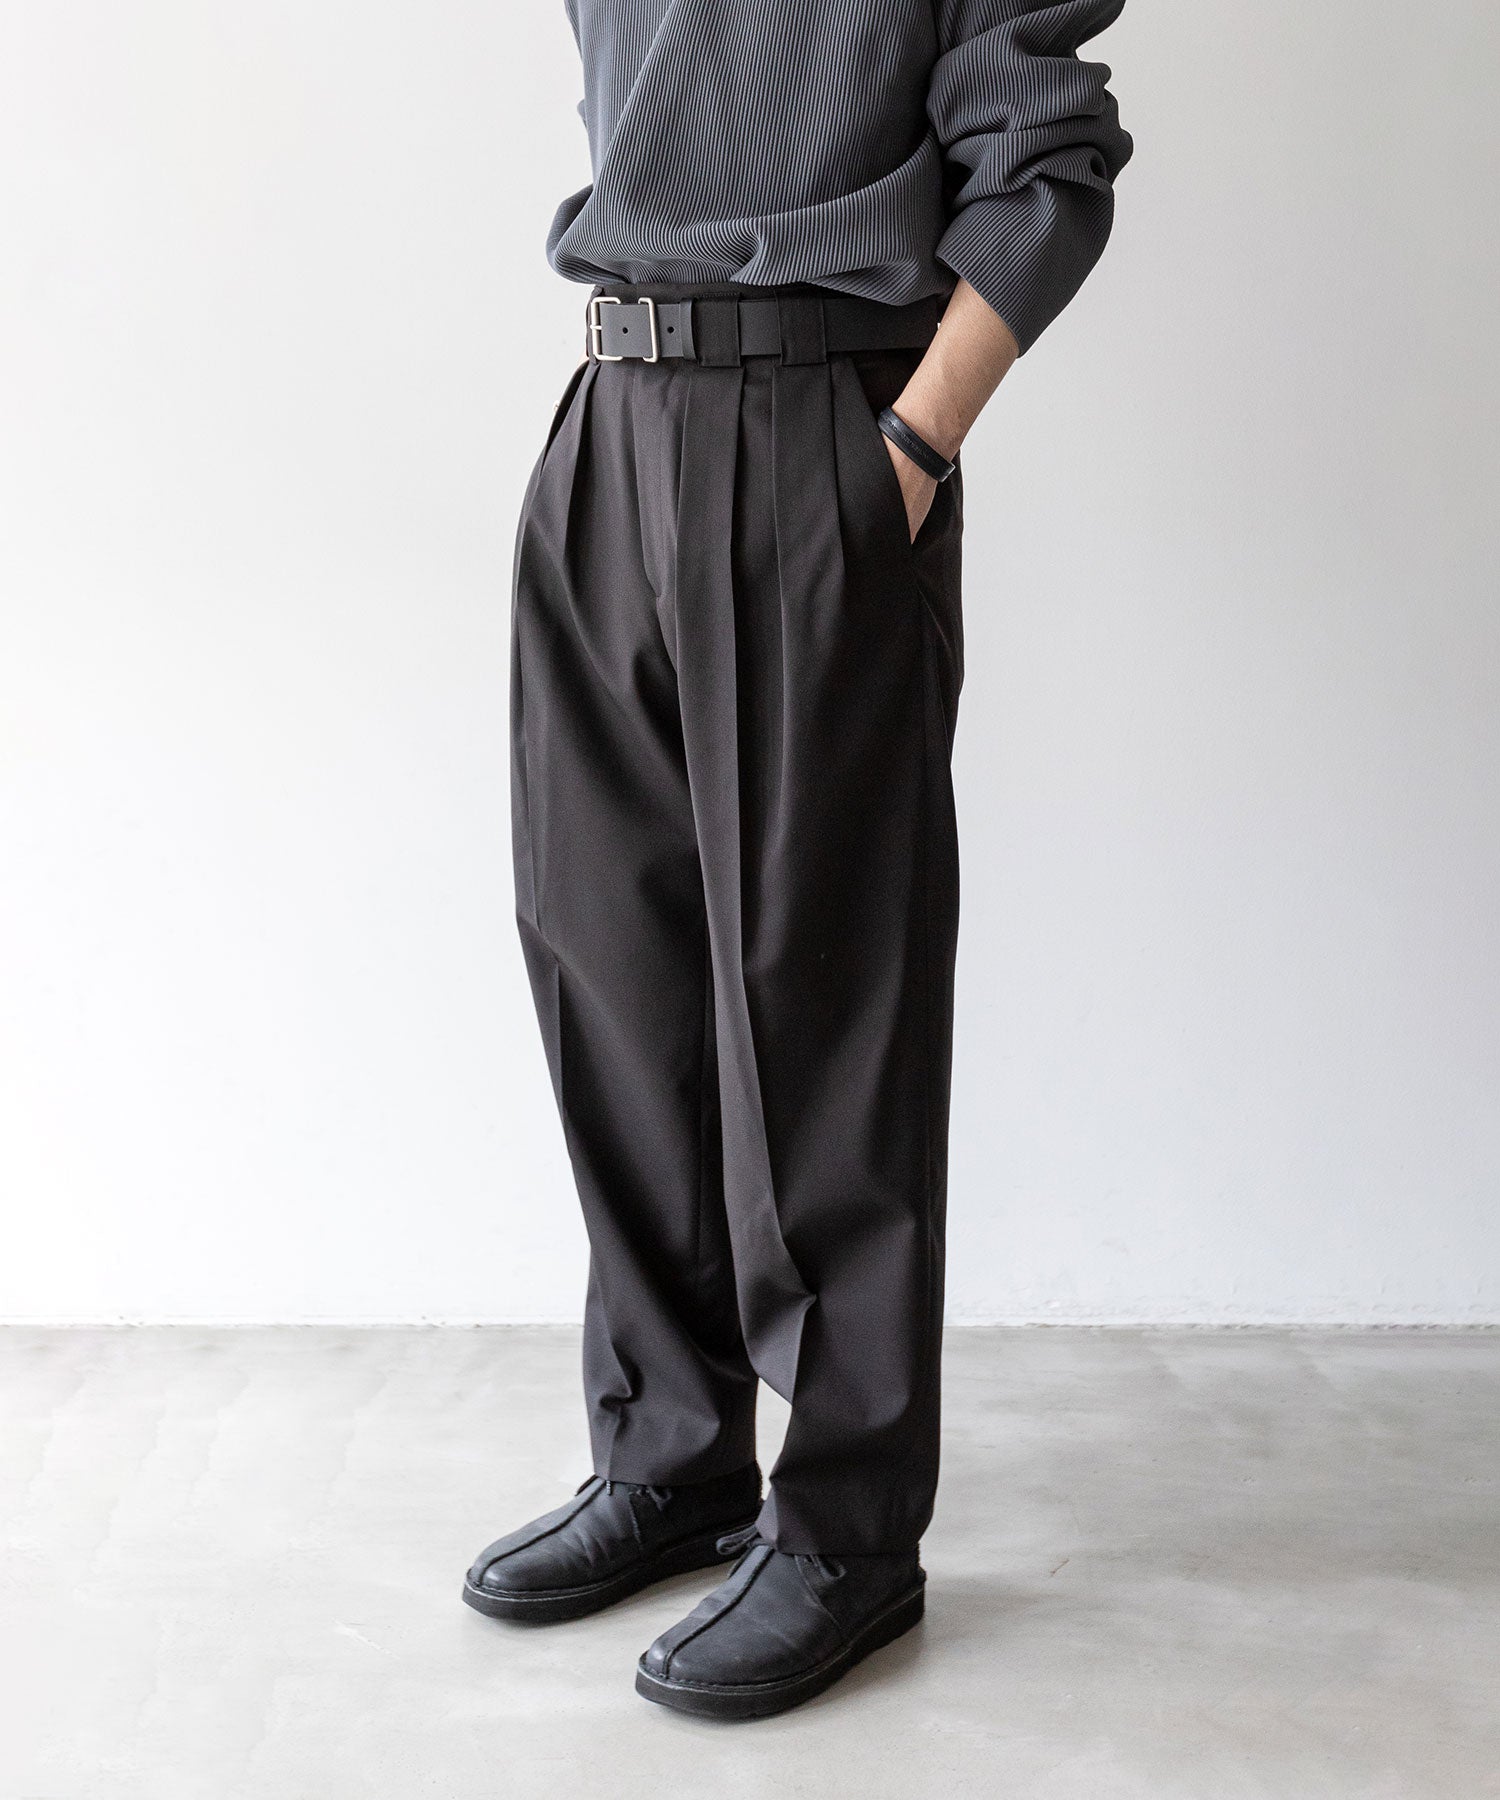 stein シュタイン 23aw DOUBLE WIDE TROUSERS sessionセッション福岡セレクトショップ 公式通販サイト